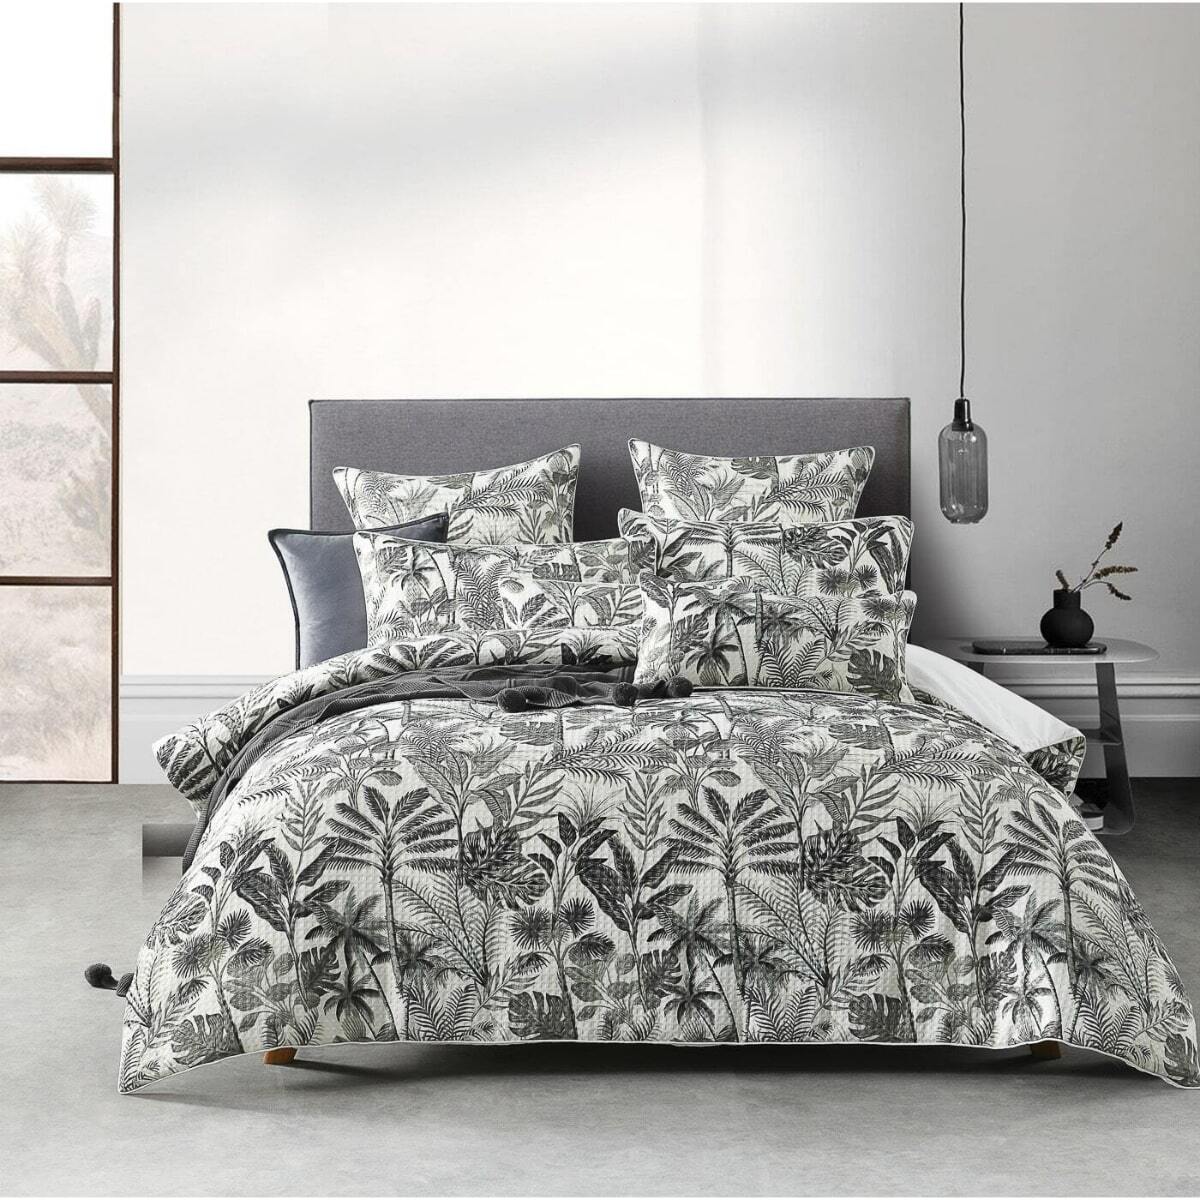 Finch Quilt Cover Set [SIZE: Oblong Cushion]